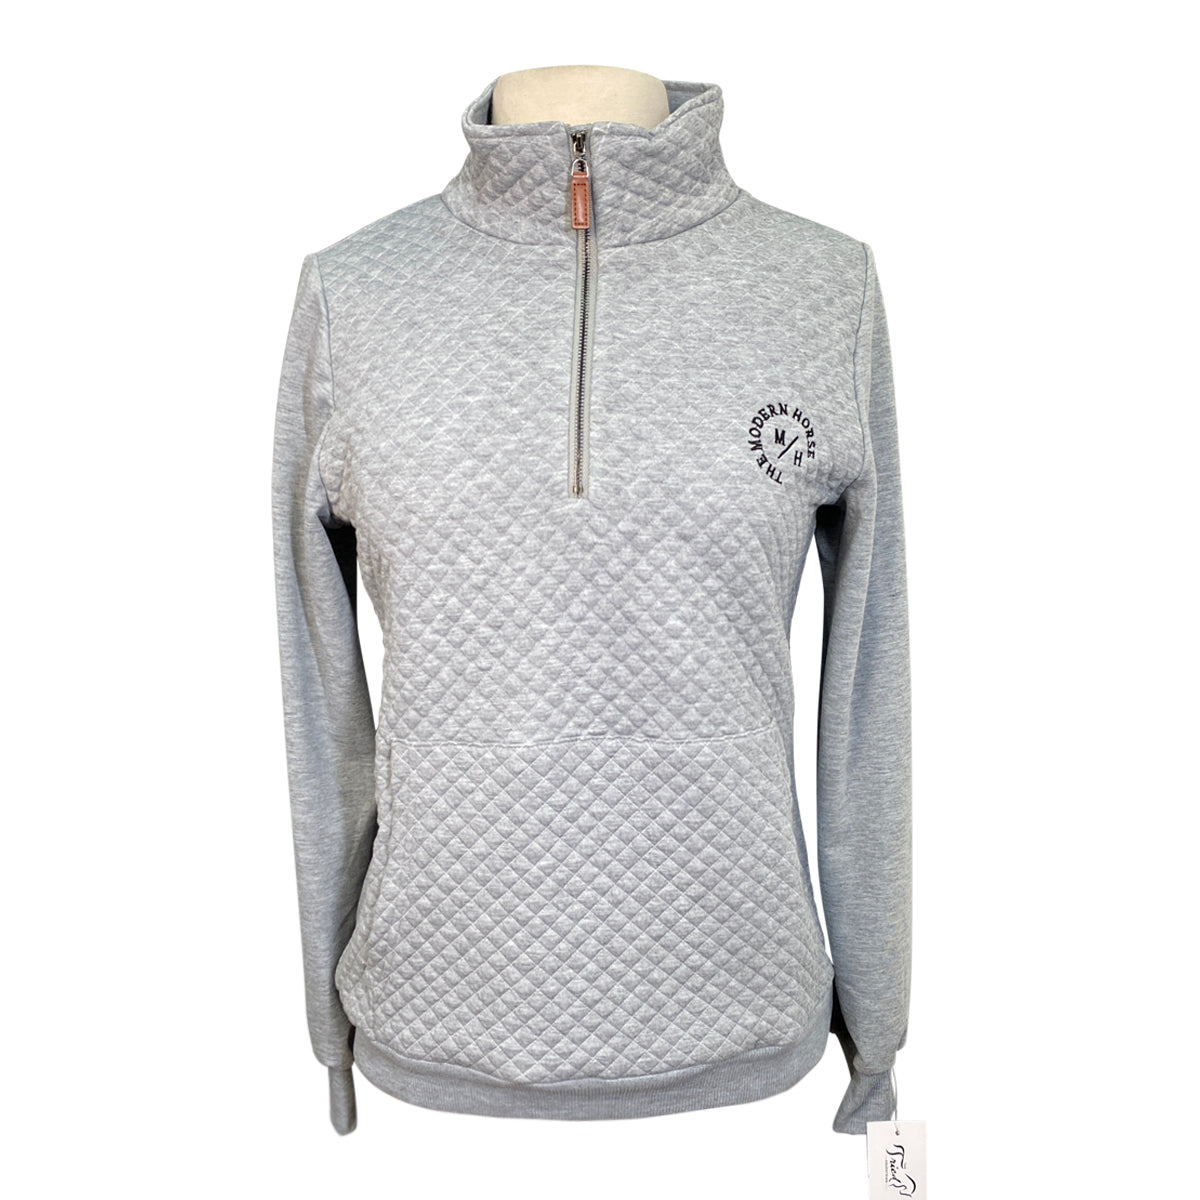 The Modern Horse Quilted 1/4 Zip in Grey